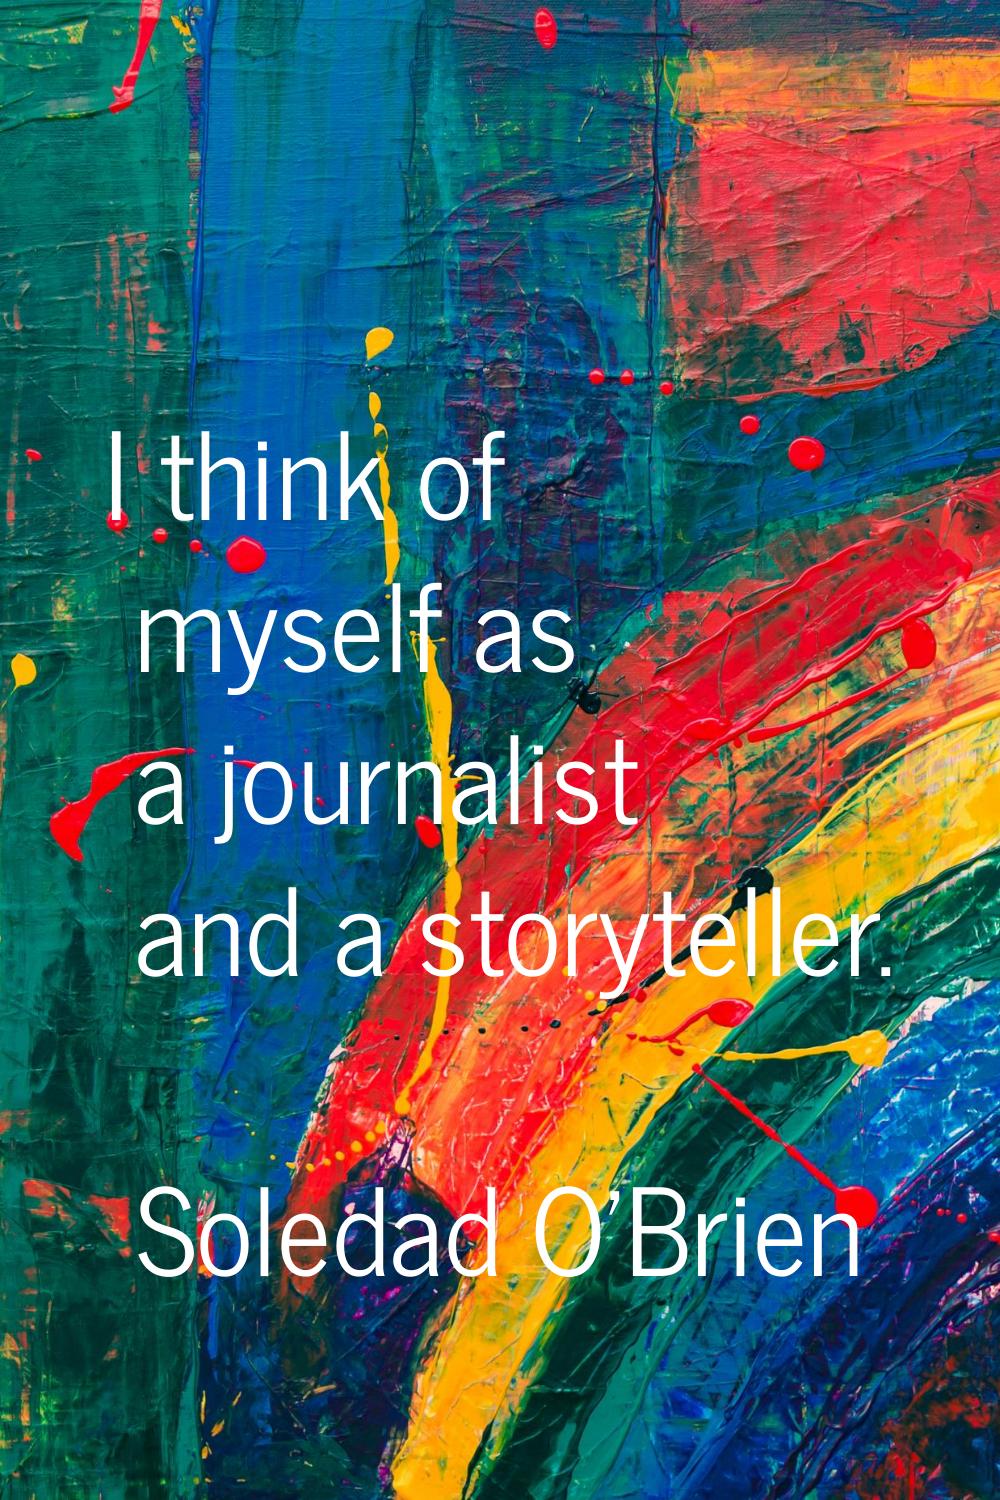 I think of myself as a journalist and a storyteller.